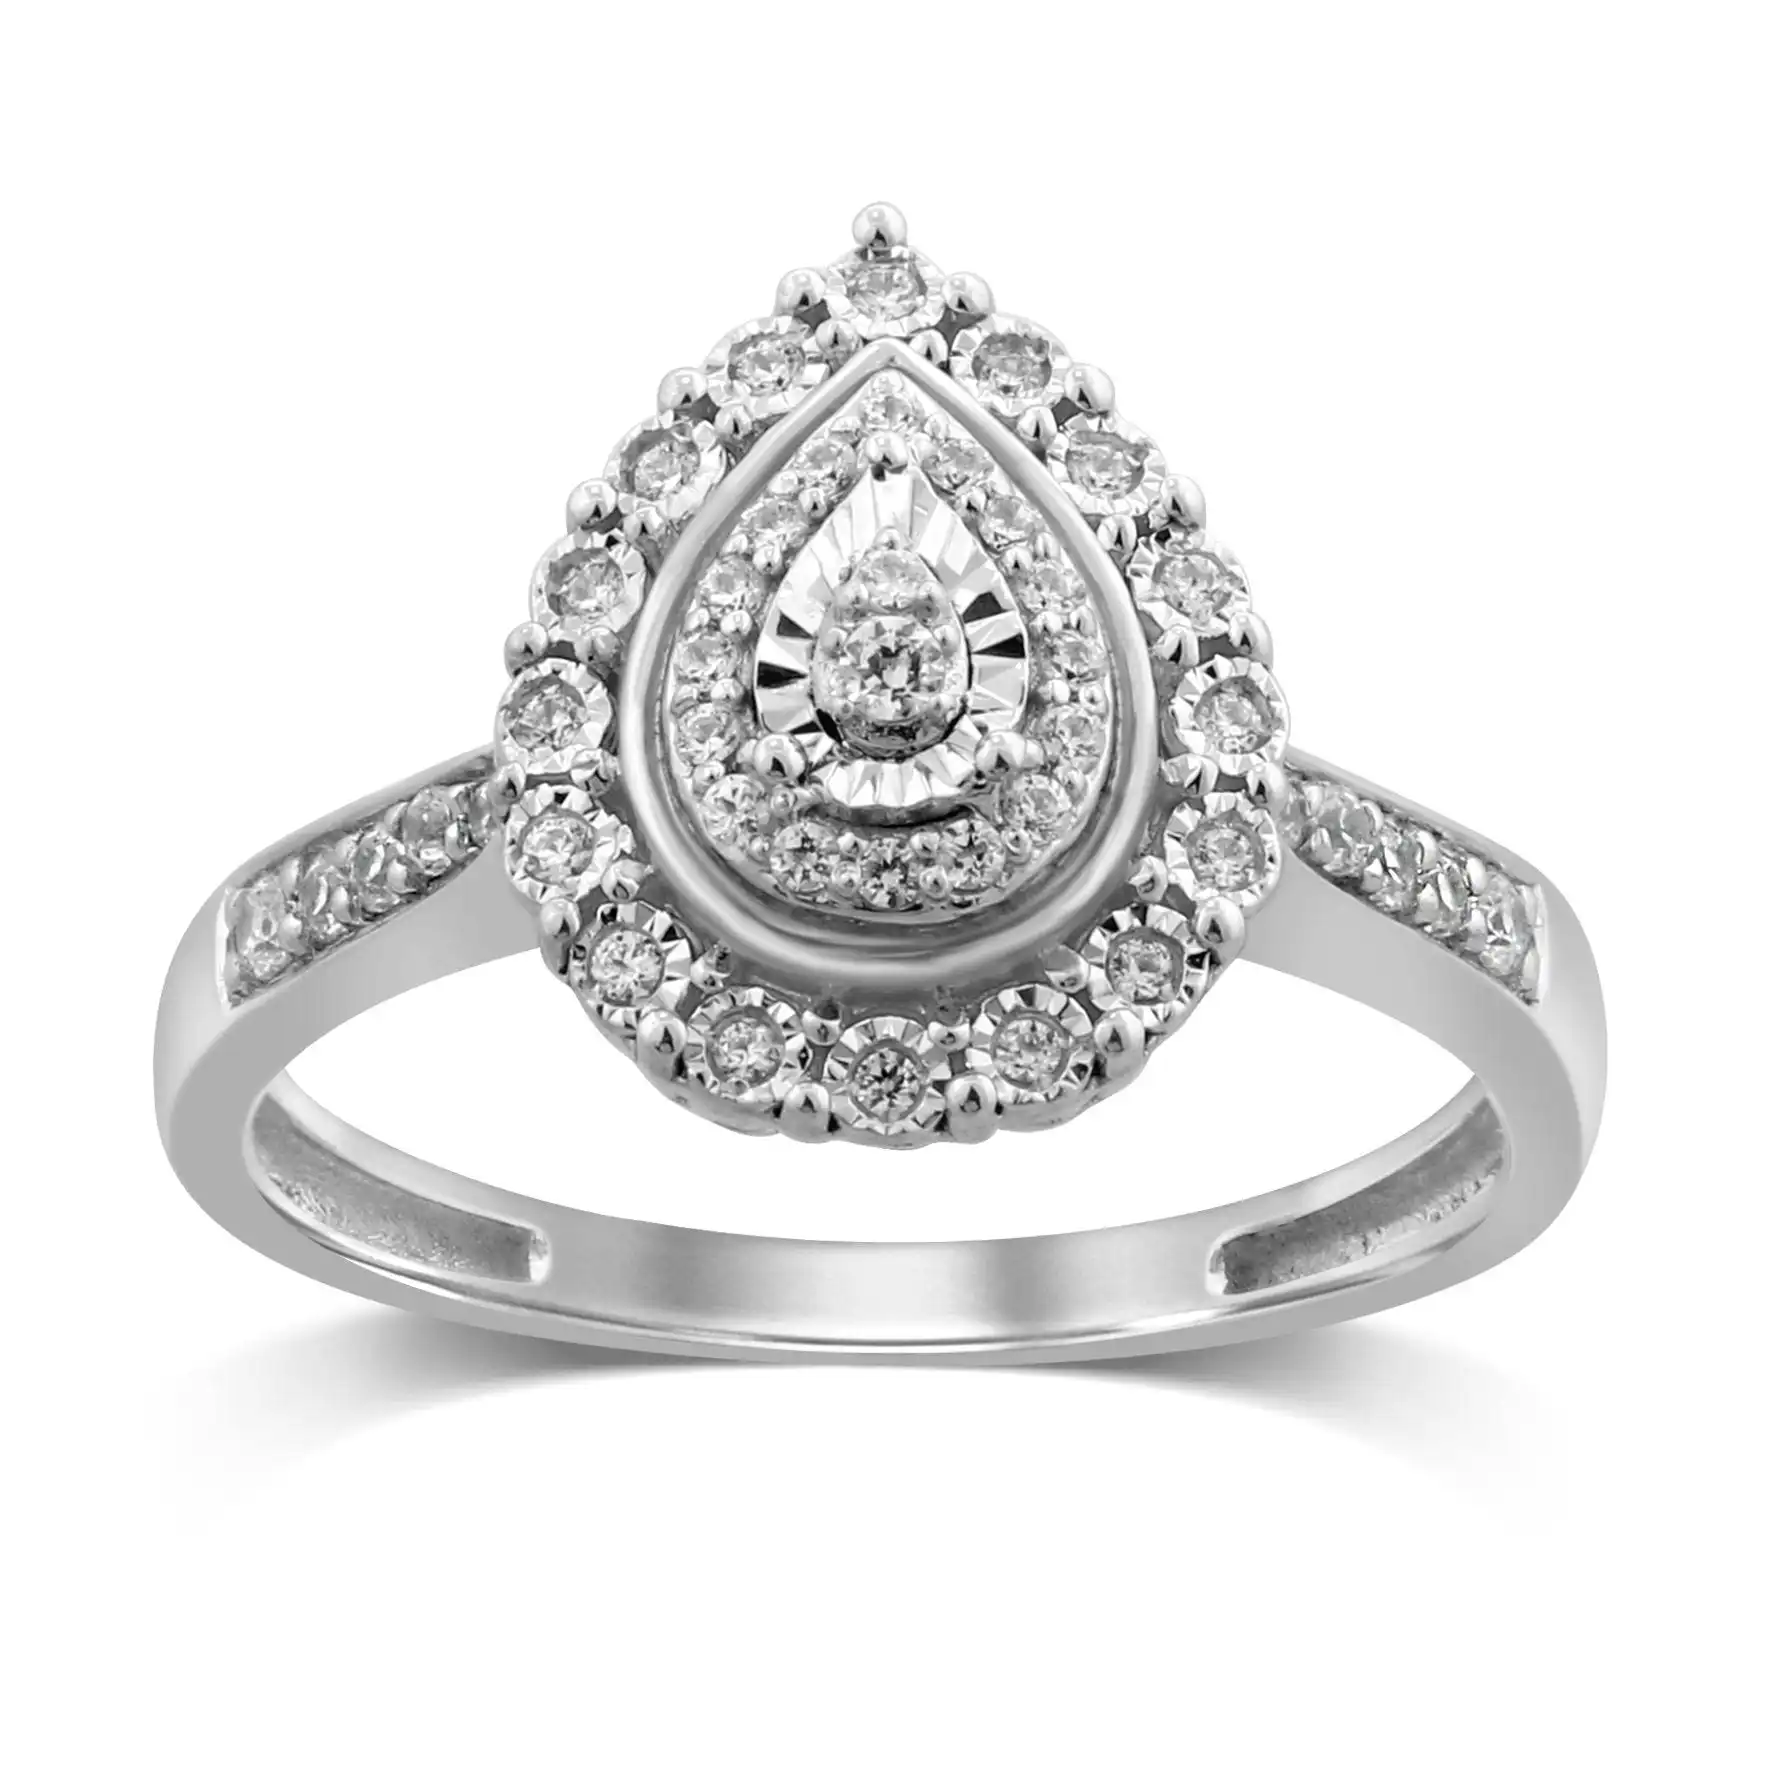 Double Pear Halo Ring with 1/5ct of Diamonds in 9ct White Gold